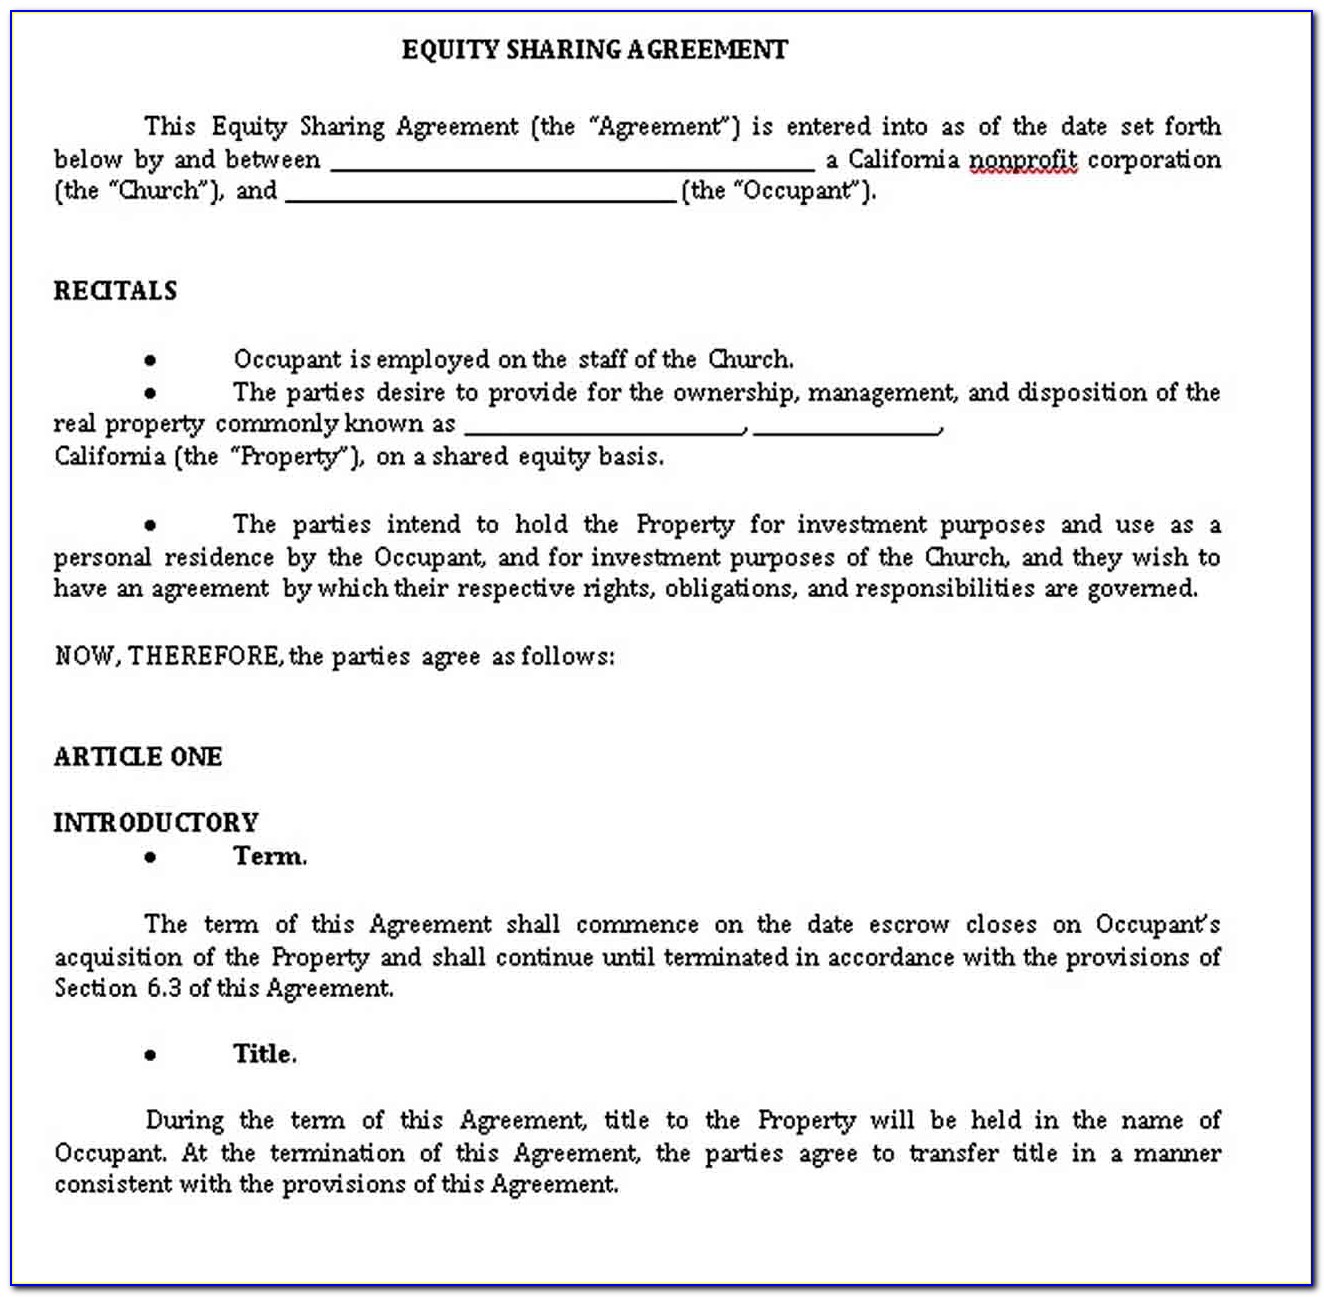 Equity Sharing Agreement Form